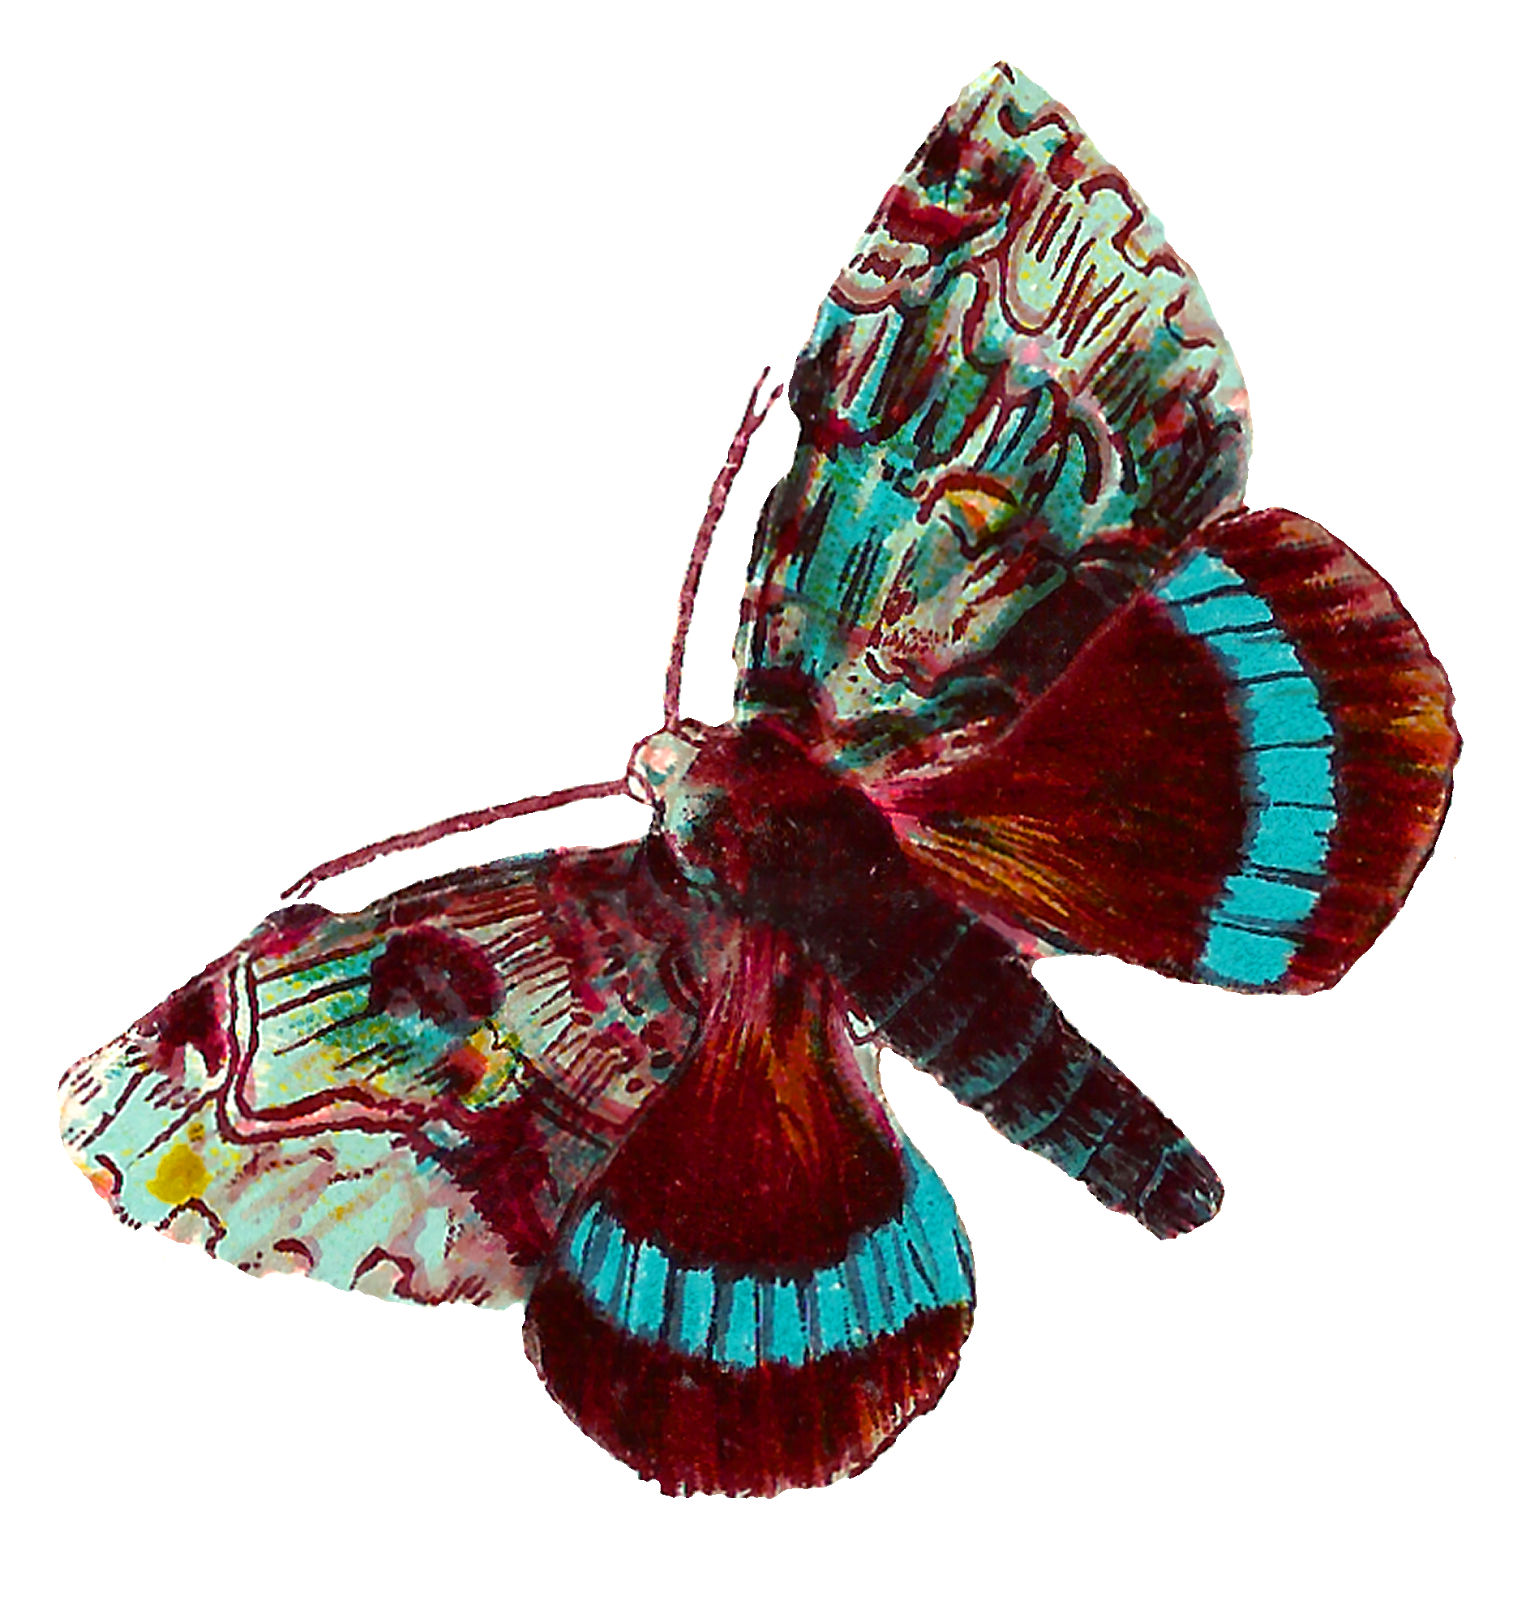 clipart butterfly maroon